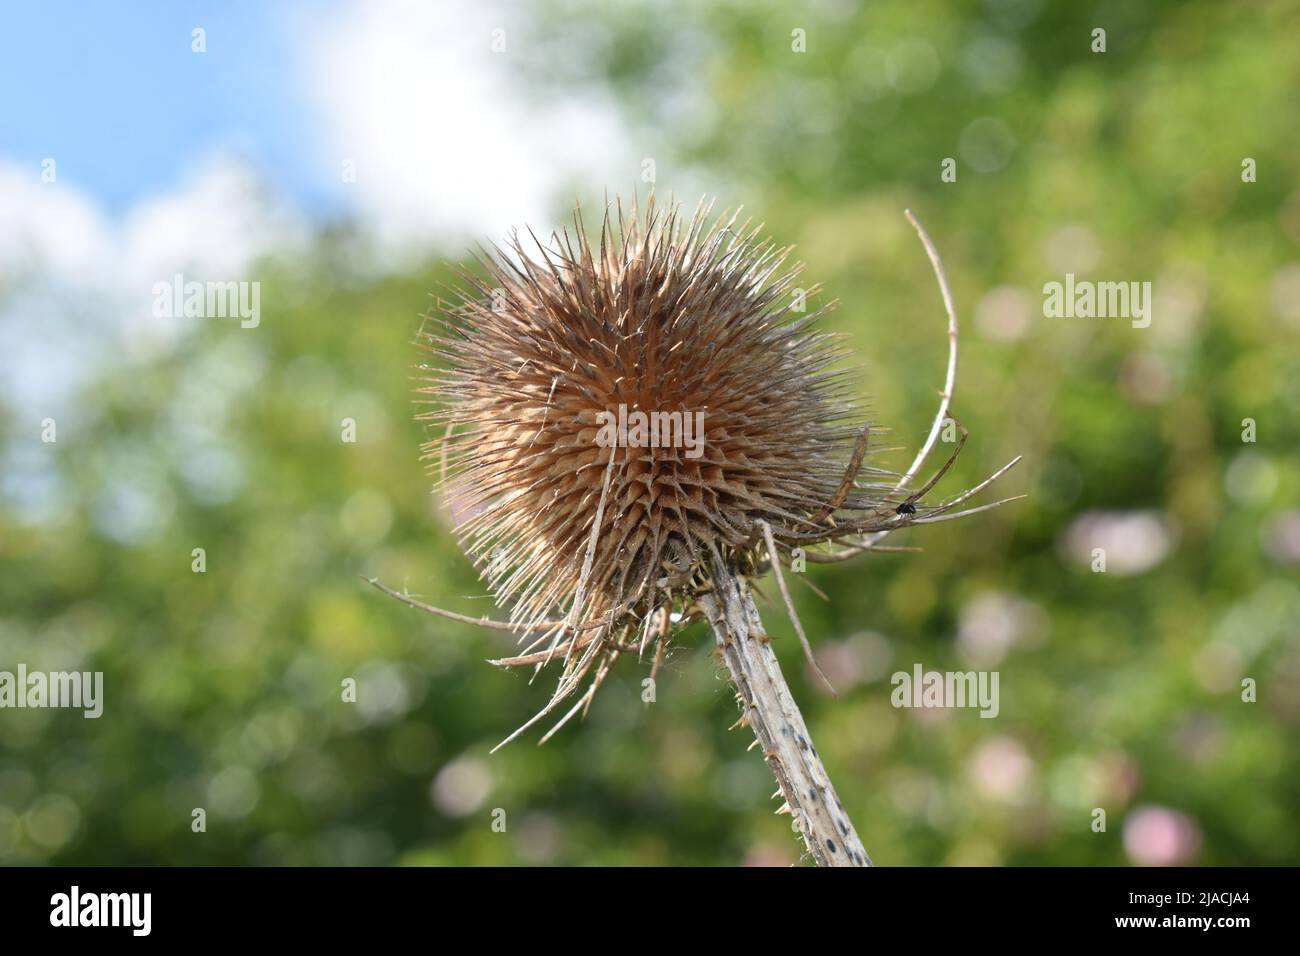 Dried thistle head (Asteraceae) against a green background with copyspace. Stock Photo